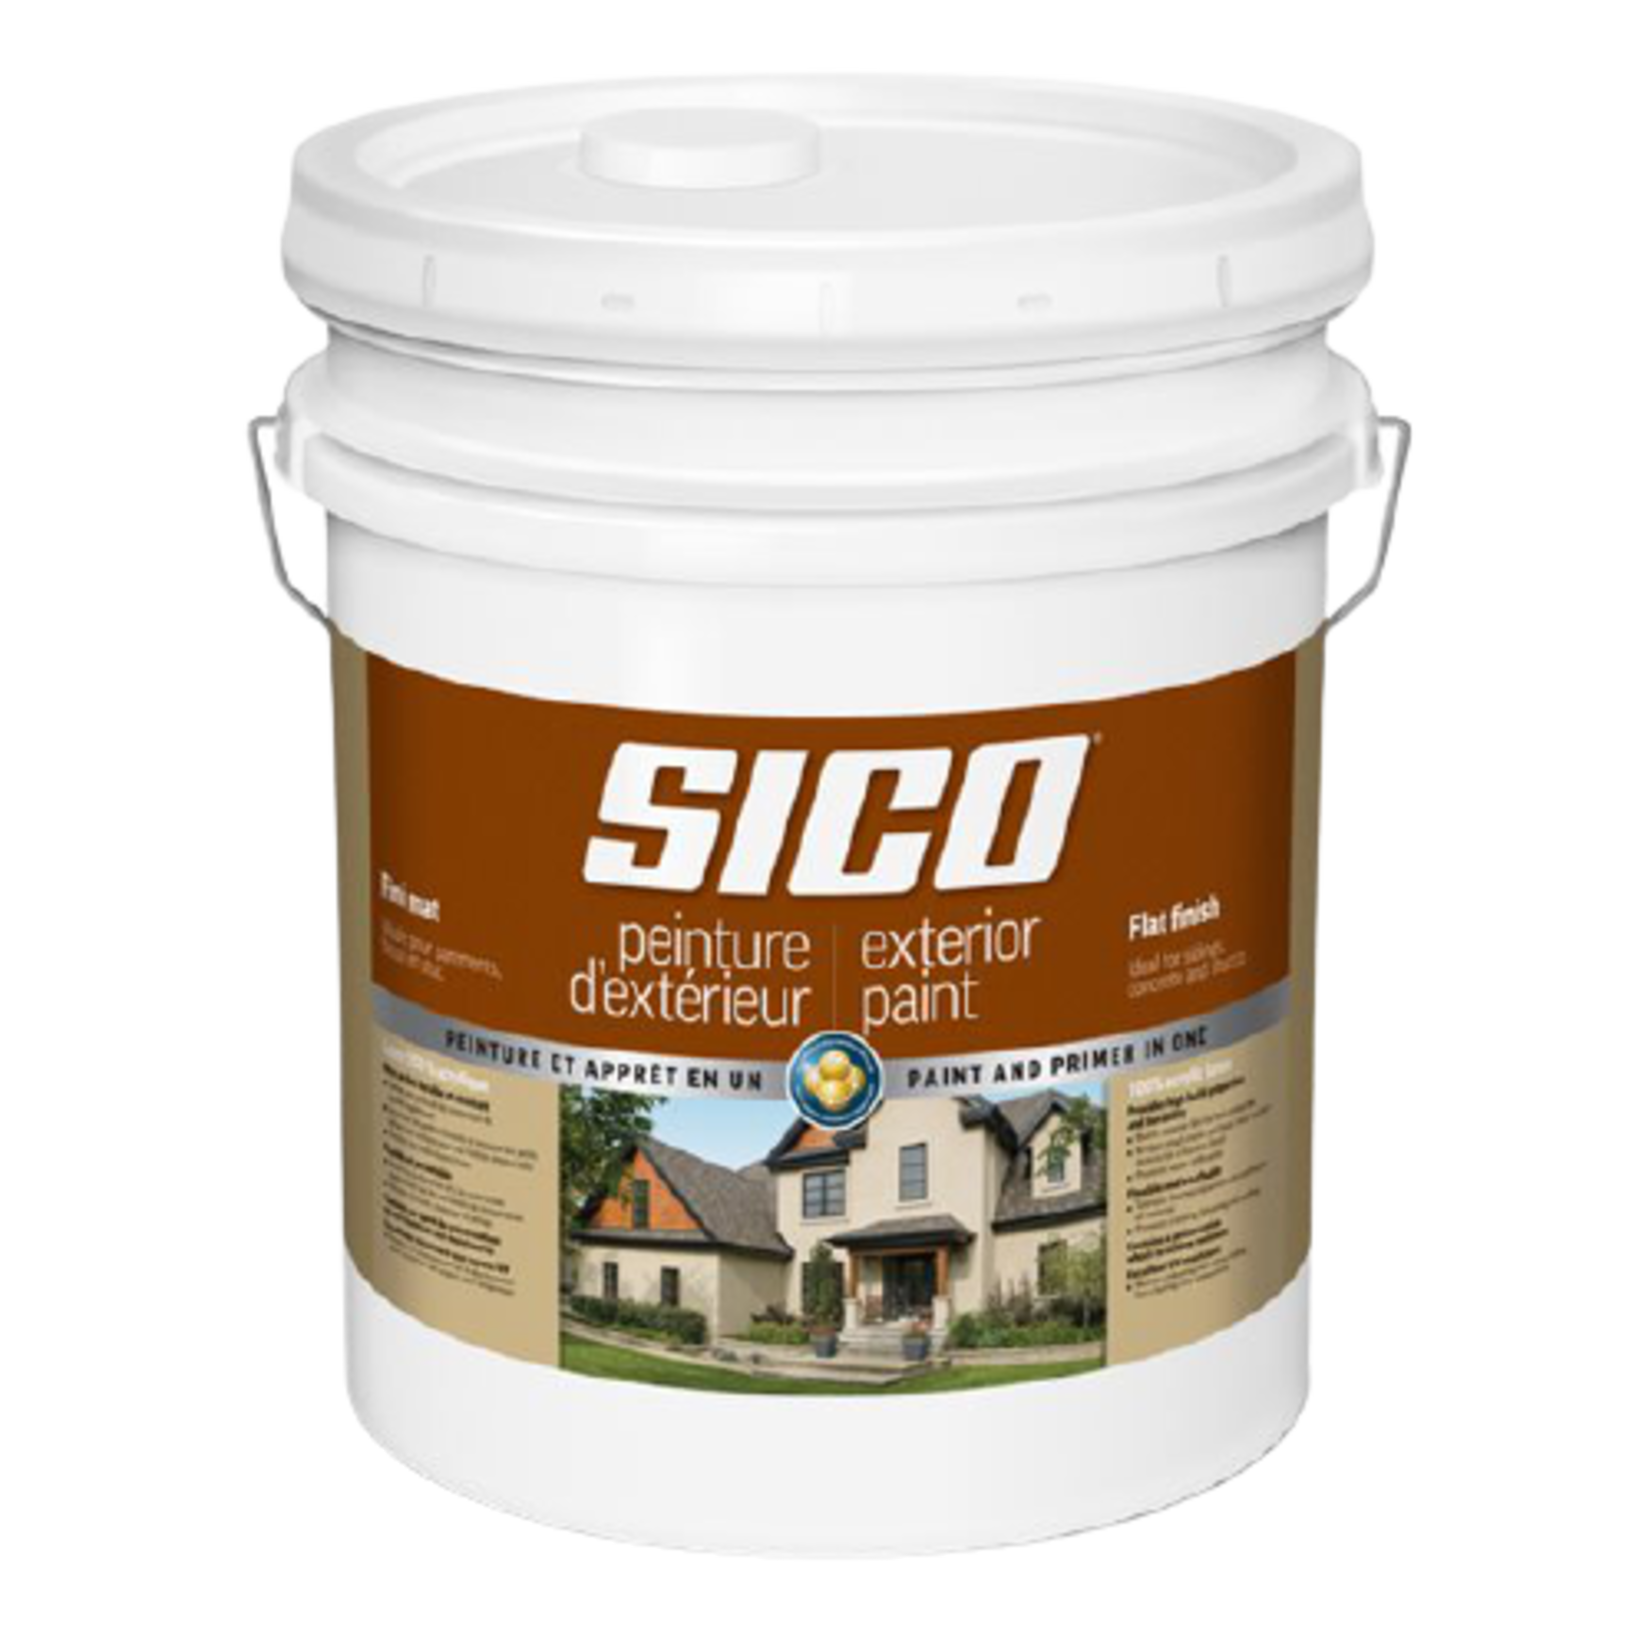 18.9L EXTERIOR PAINT AND PRIMER FLAT FINISH NEUTRAL BASE SICO